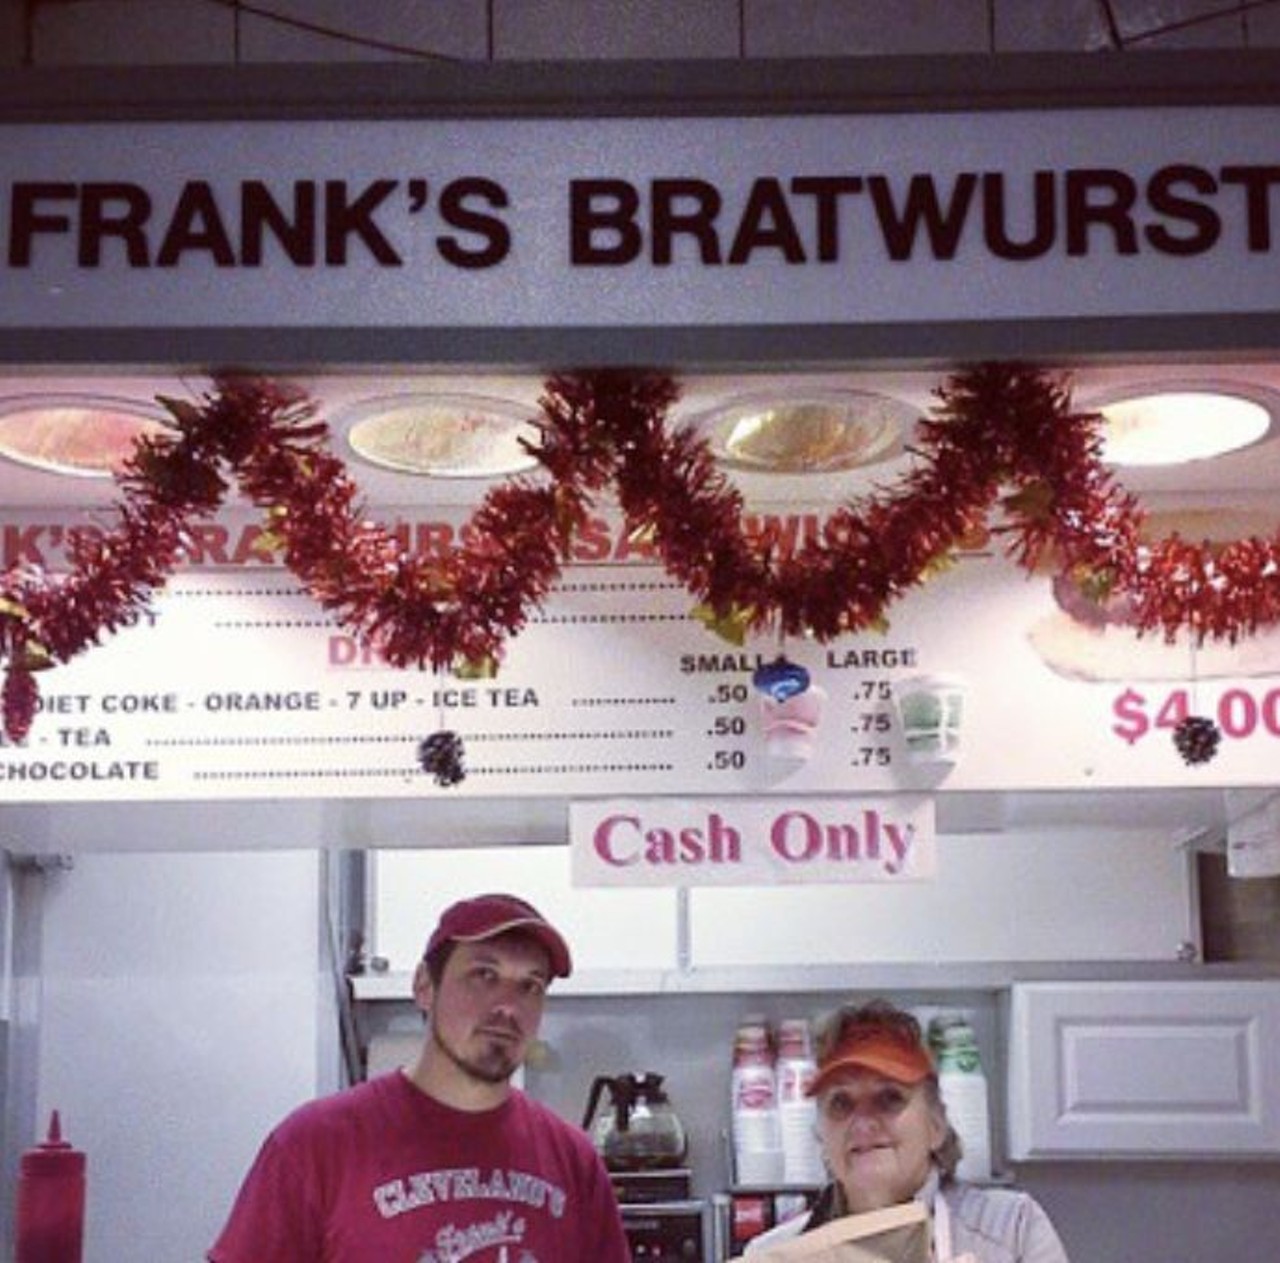 Bratwurst Sandwich 
Where: The West Side Market used to be the only place to snag the famous Frank's, but a brat-mobile launched in 2011 has taken his famous sandwiches to the streets
Photo via Scene Archives